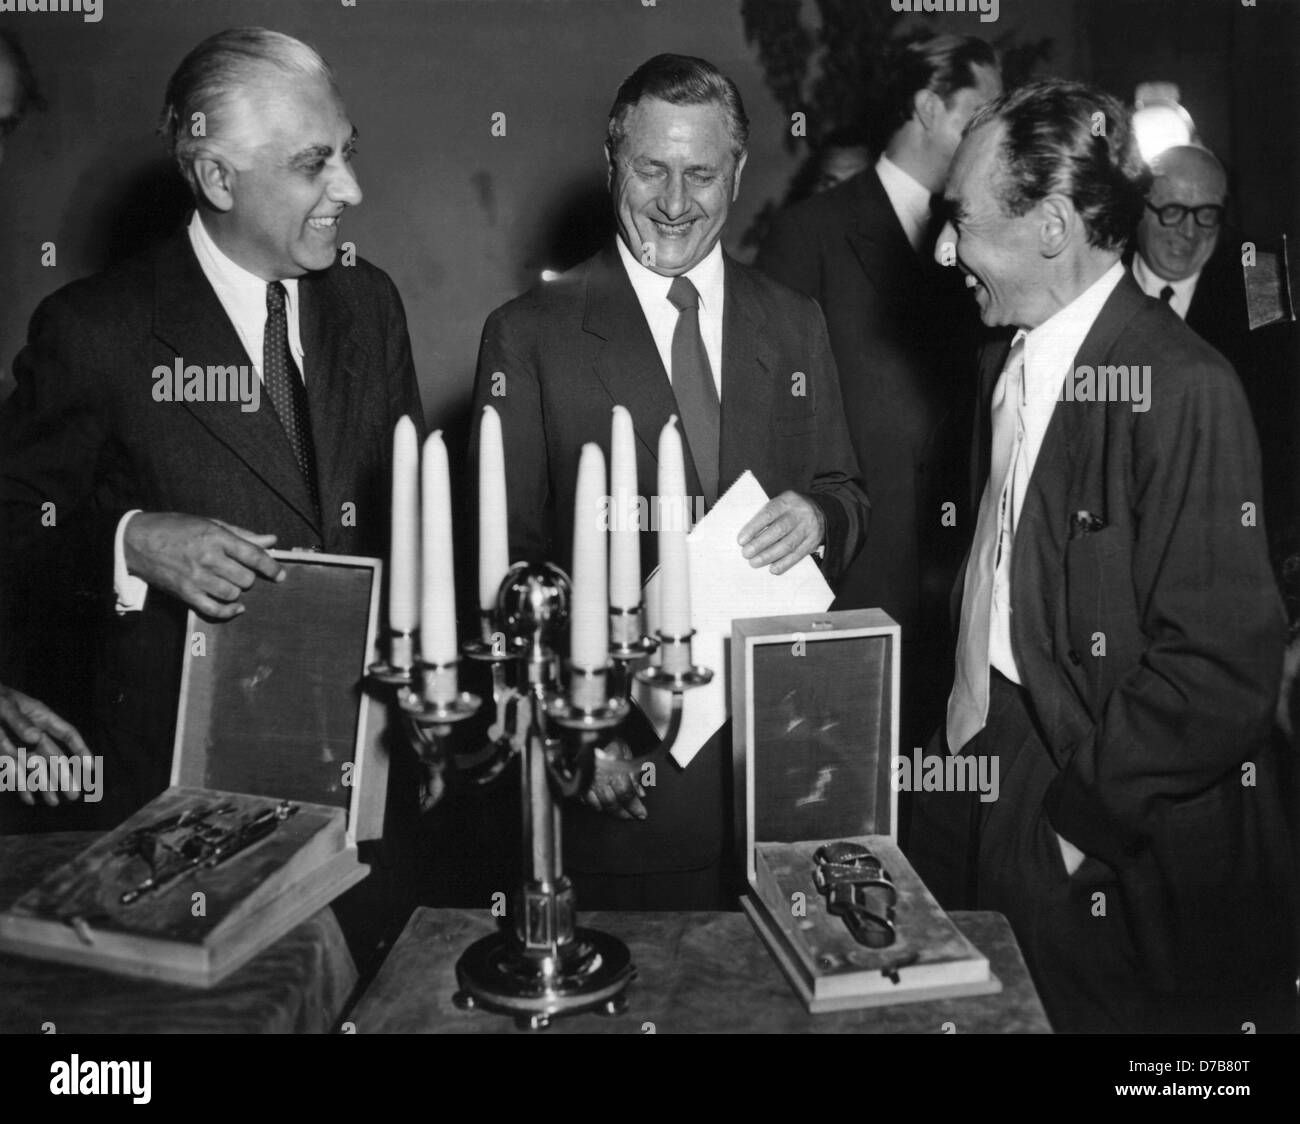 Director Josef von Baky (l), producer Günter Stapenhorst (M) and screenplay writer Erich Kästner (r) are happy about their awards for the film 'Lottie and Lisa' on the 7th of June in 1951 at the Federal Film Award Ceremony in Berlin. The German Film Award was awarded for the second time in 1951. Stock Photo